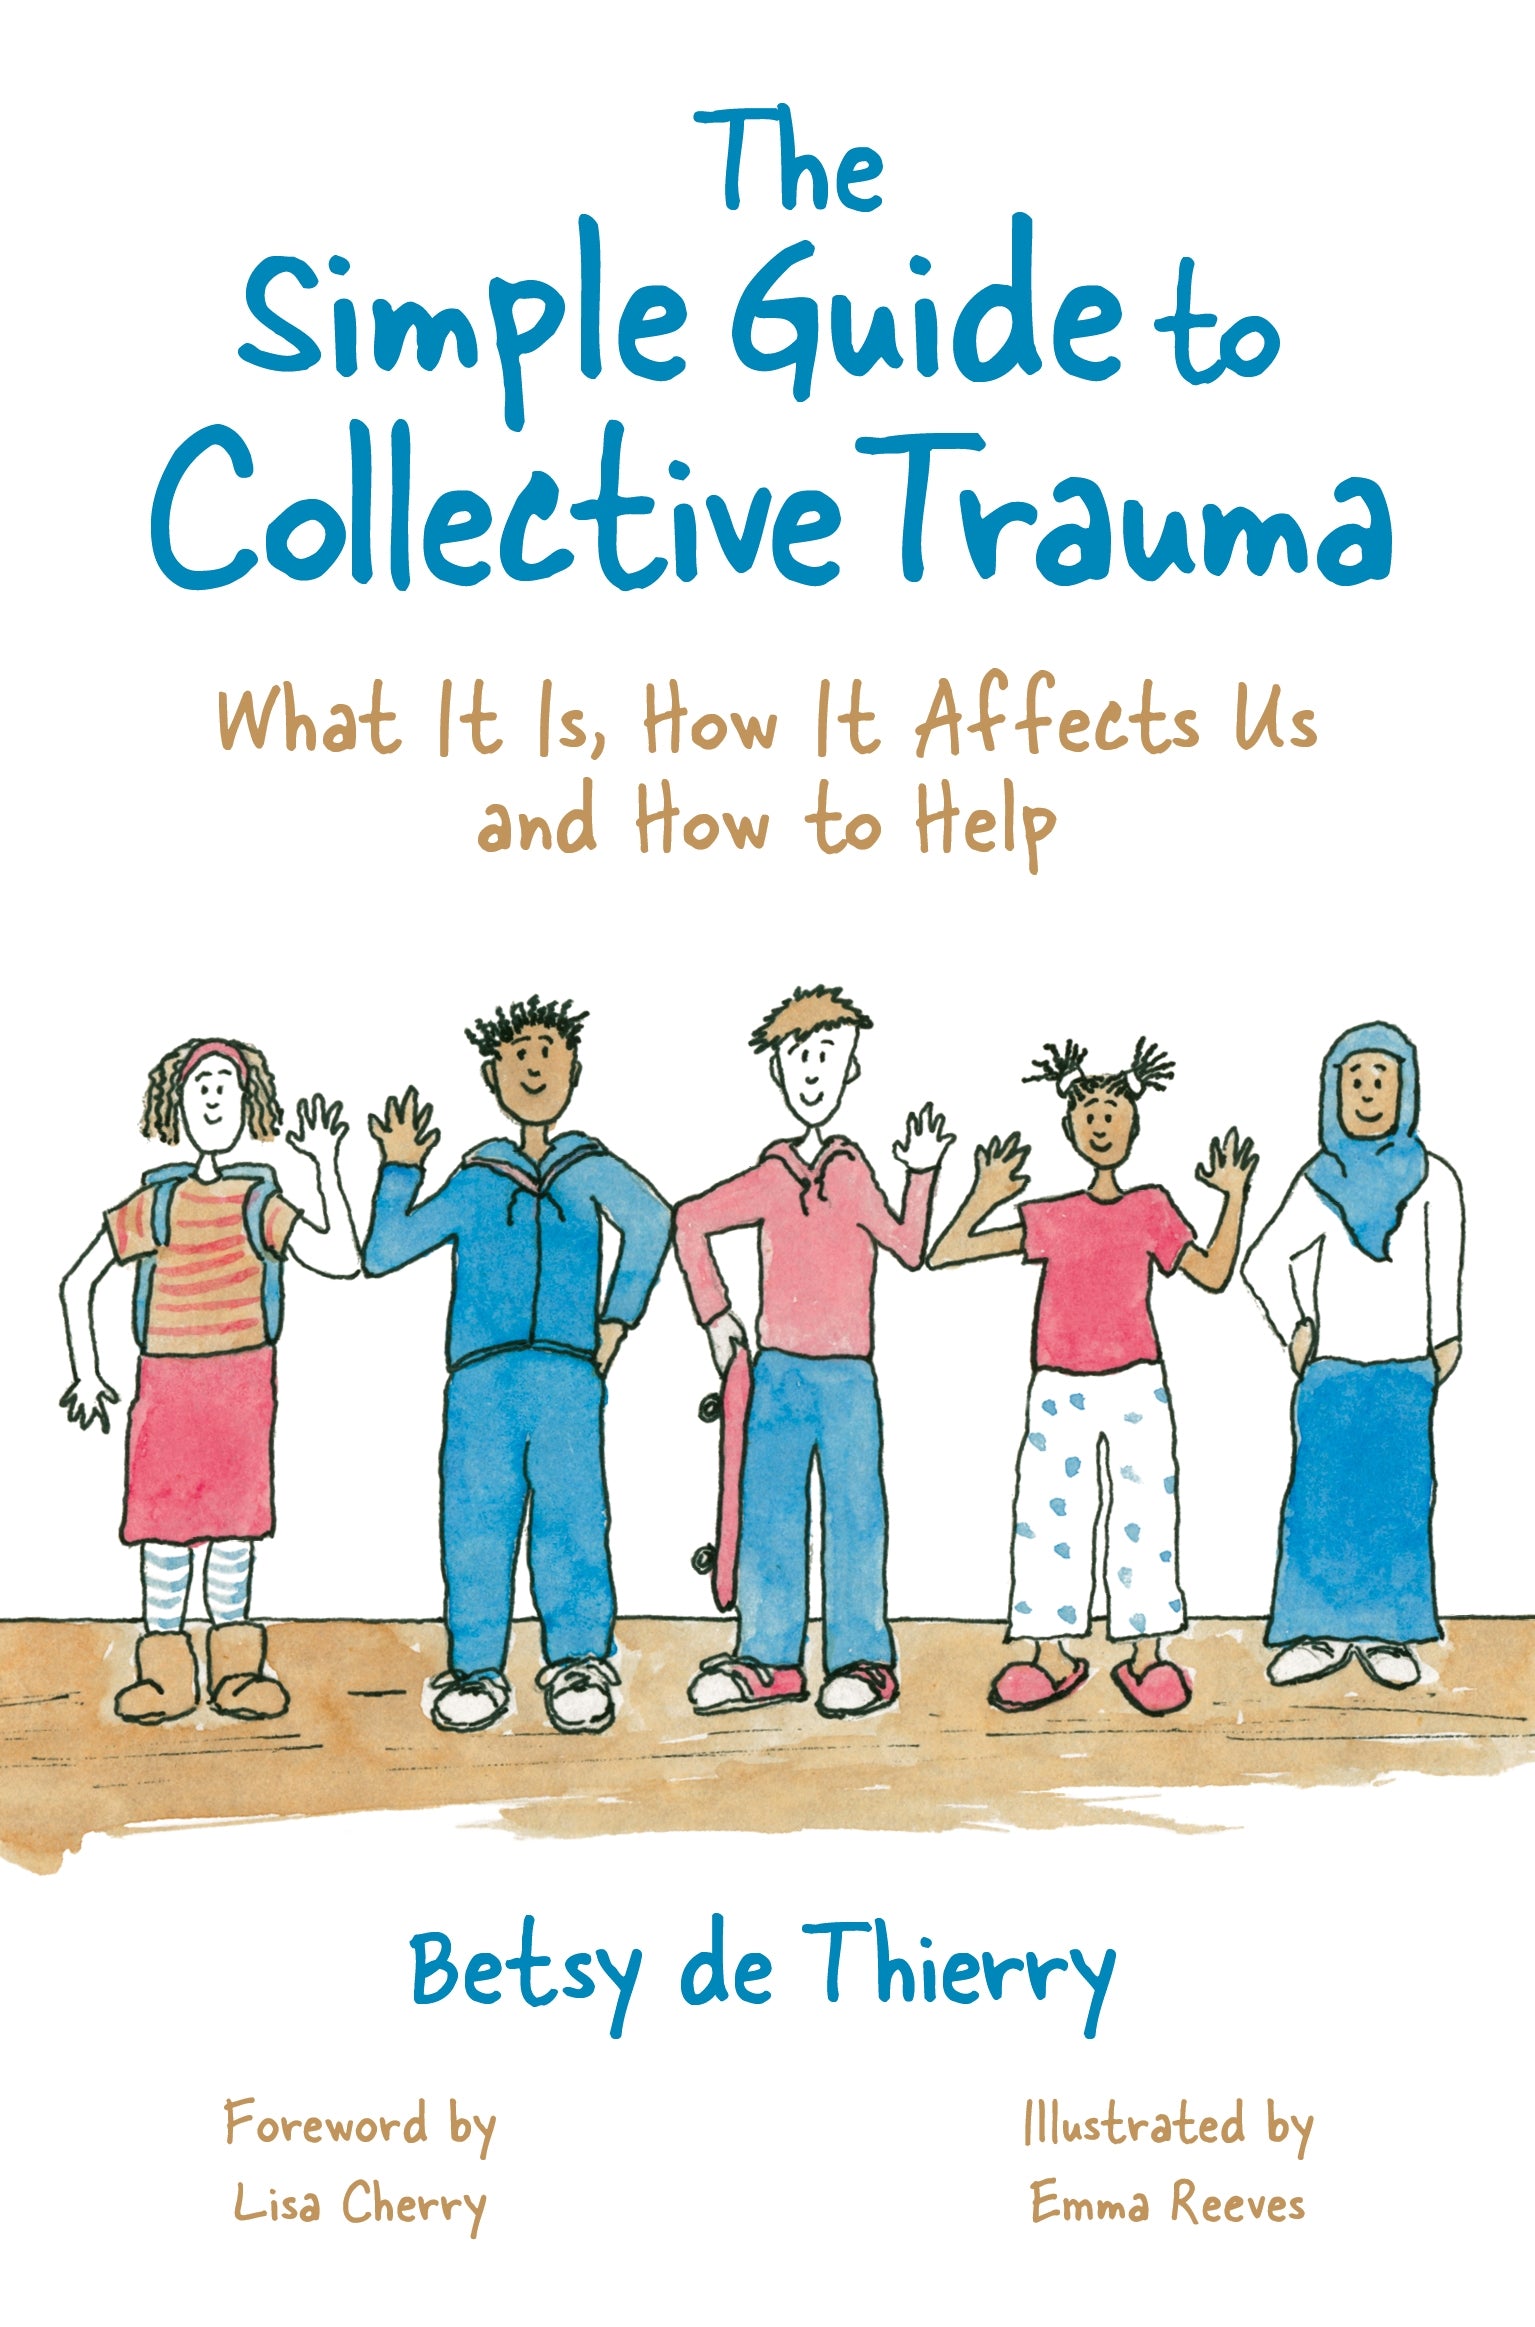 The Simple Guide to Collective Trauma by Betsy de Thierry, Lisa Cherry, Emma Reeves